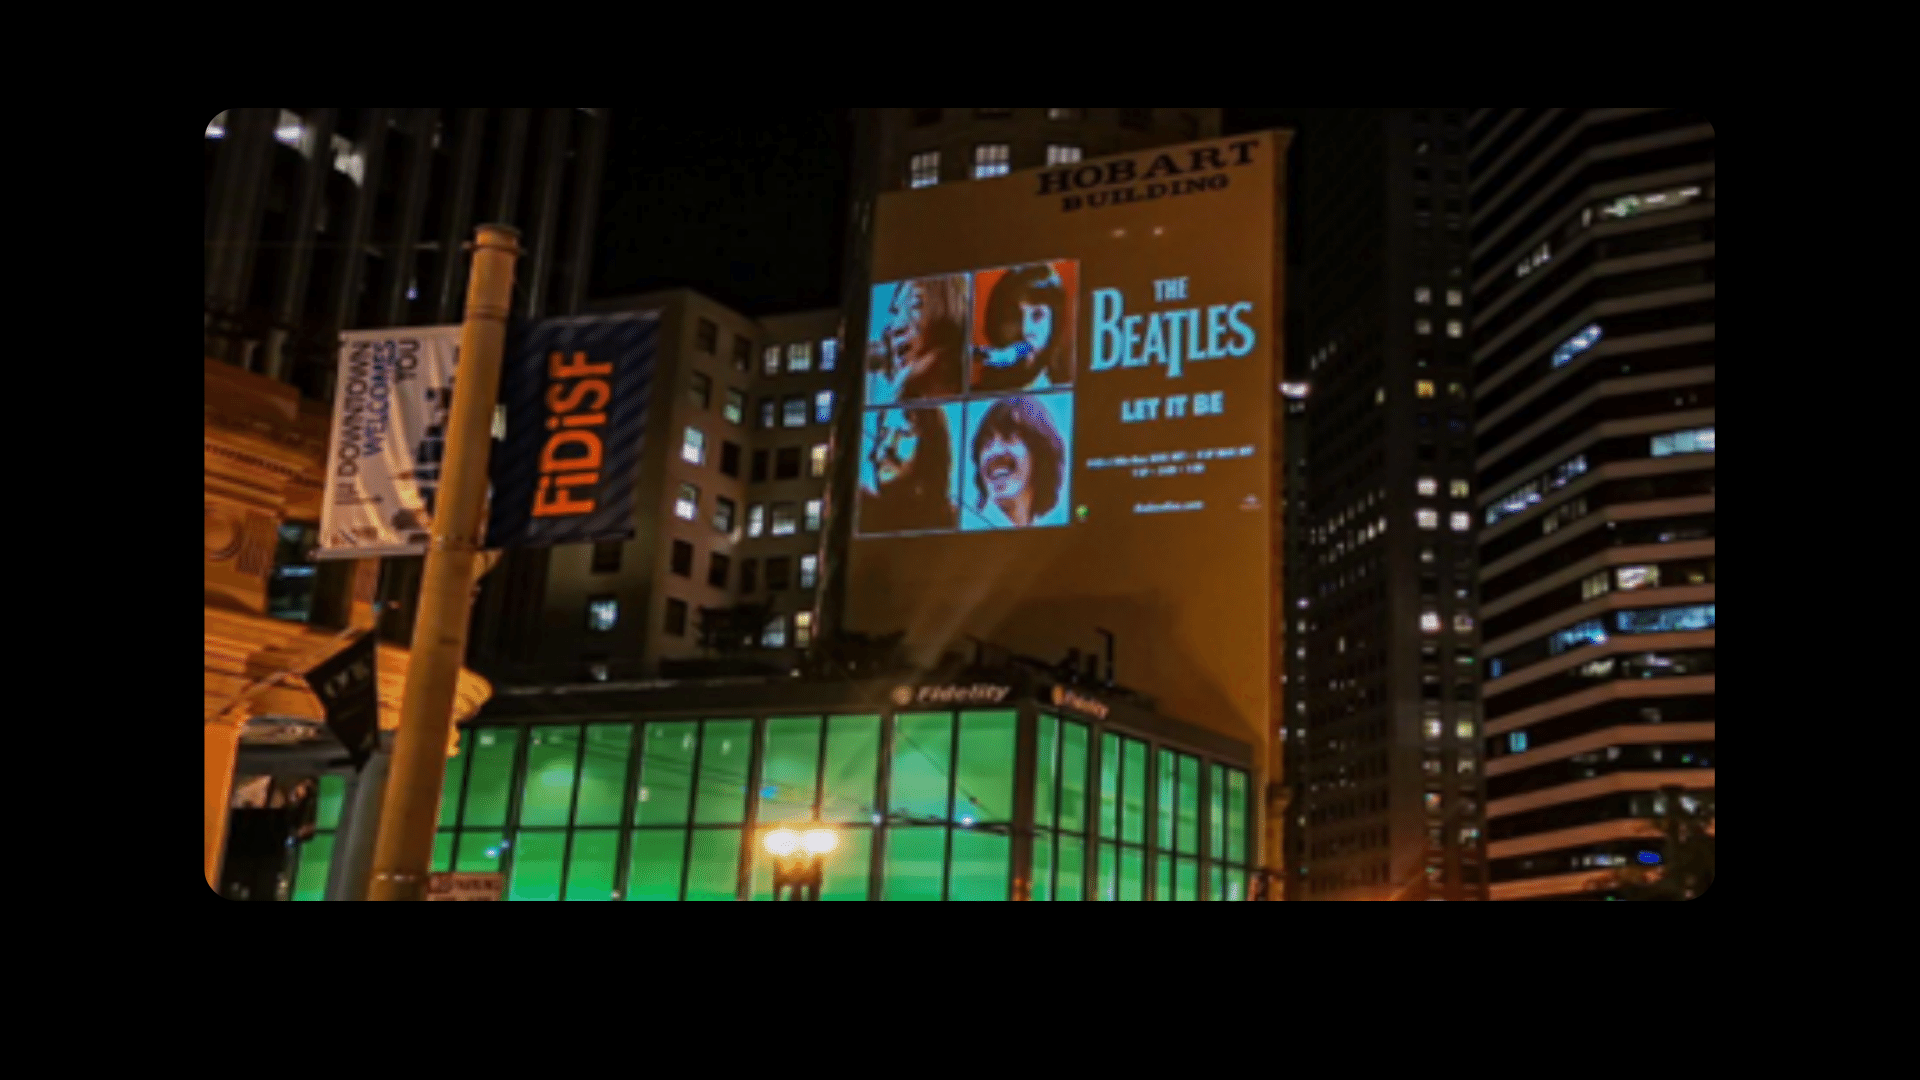 The Beatles Projection